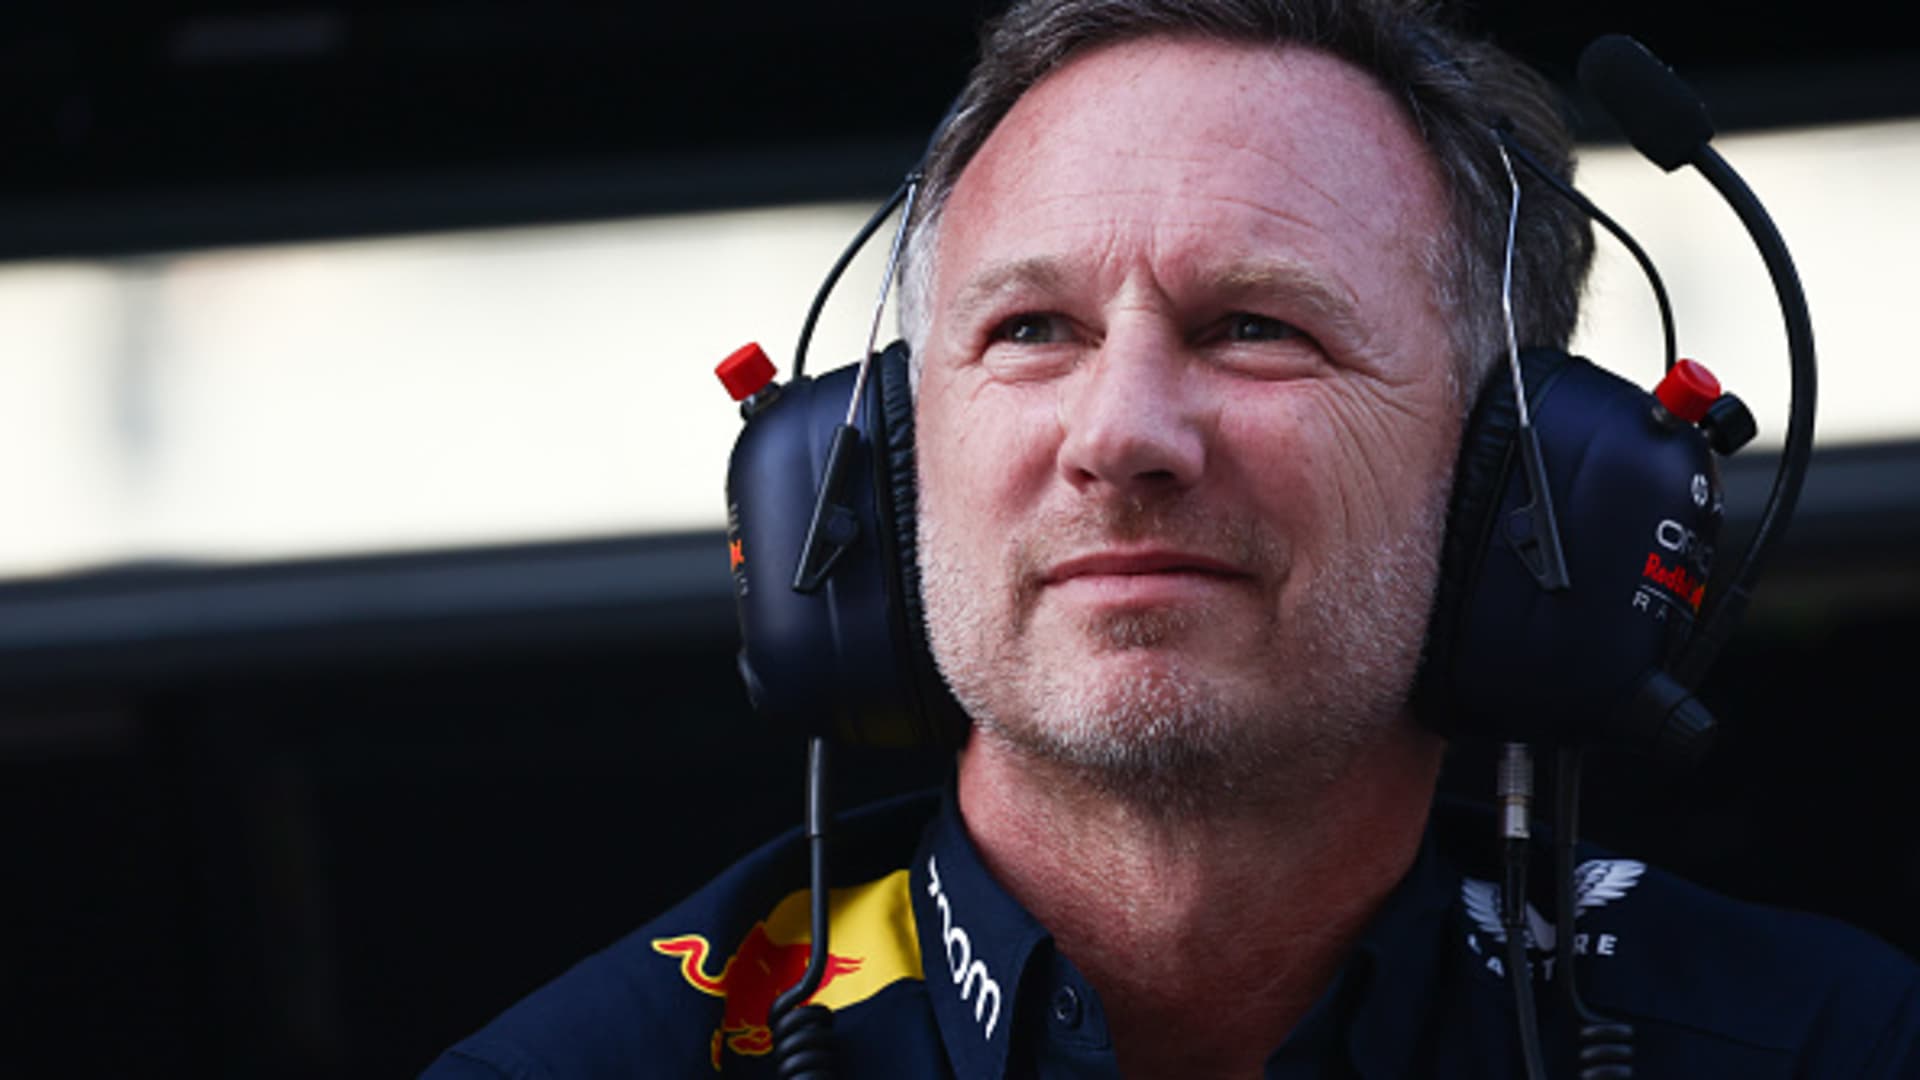 Christian Horner, Red Bull's F1 team principal, under investigation by company